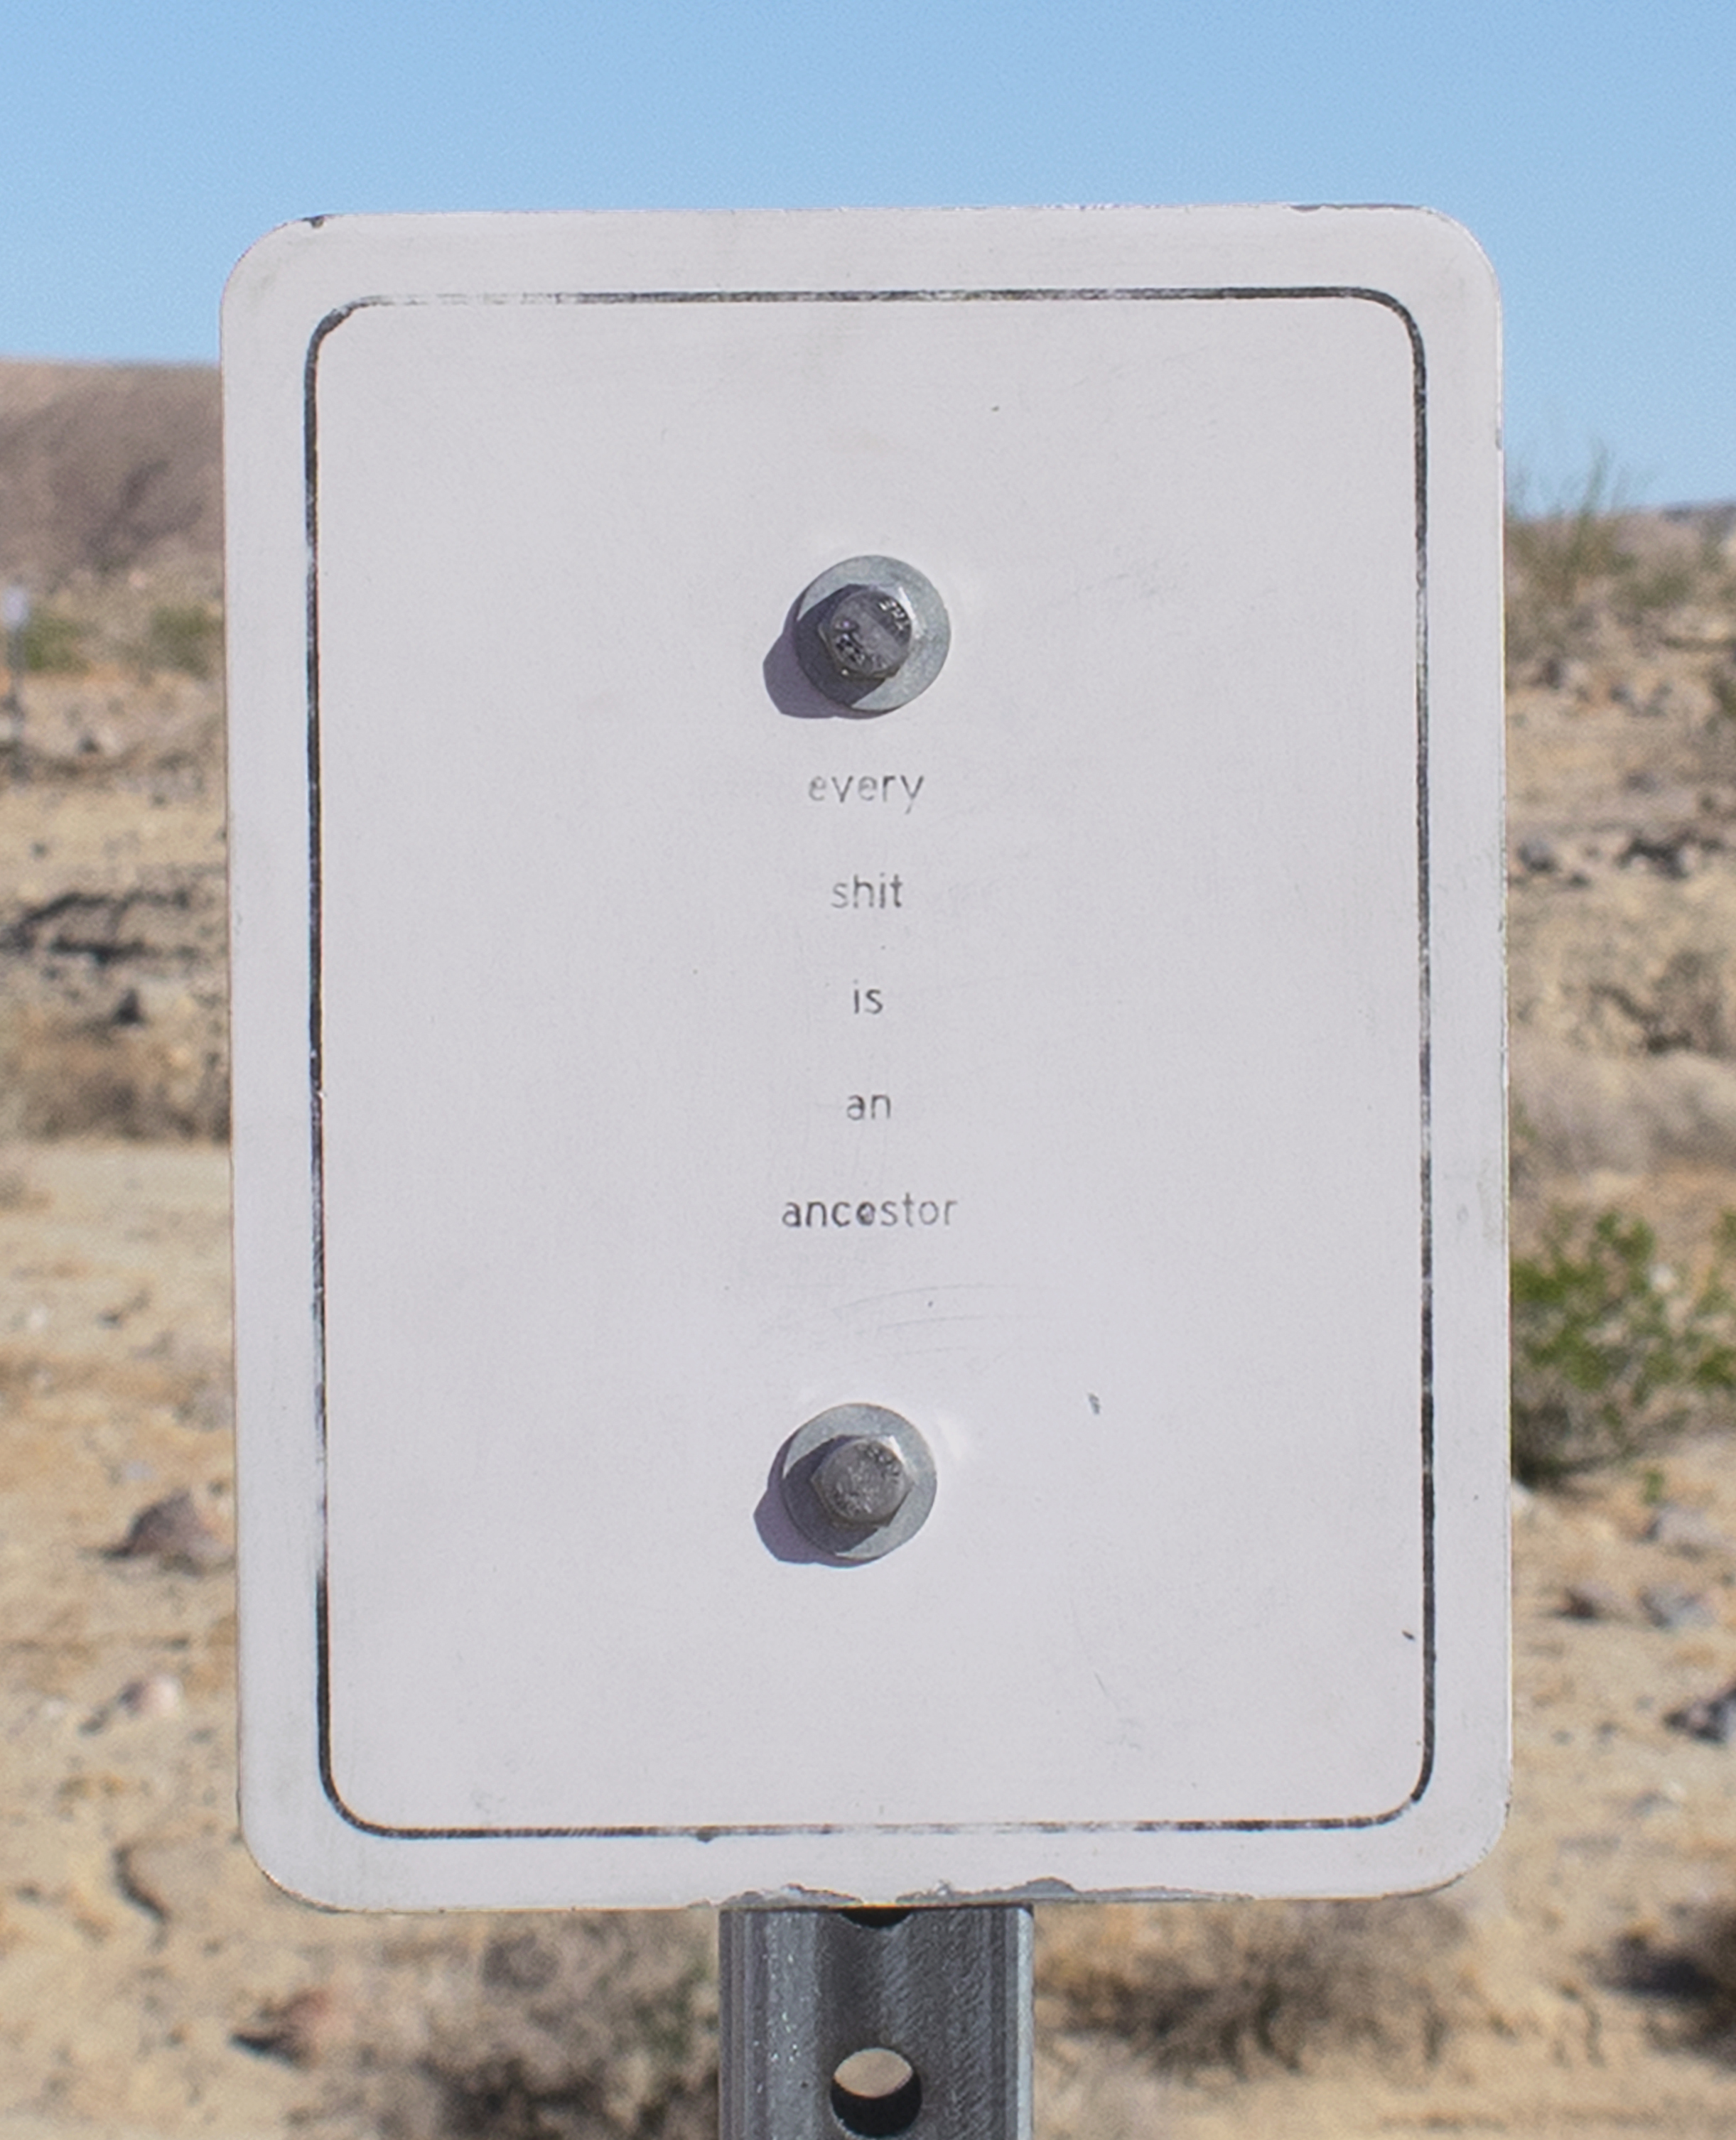   children of the sun    Galvanized Steel Signs and Posts   Dimensions Variable  2018-19 